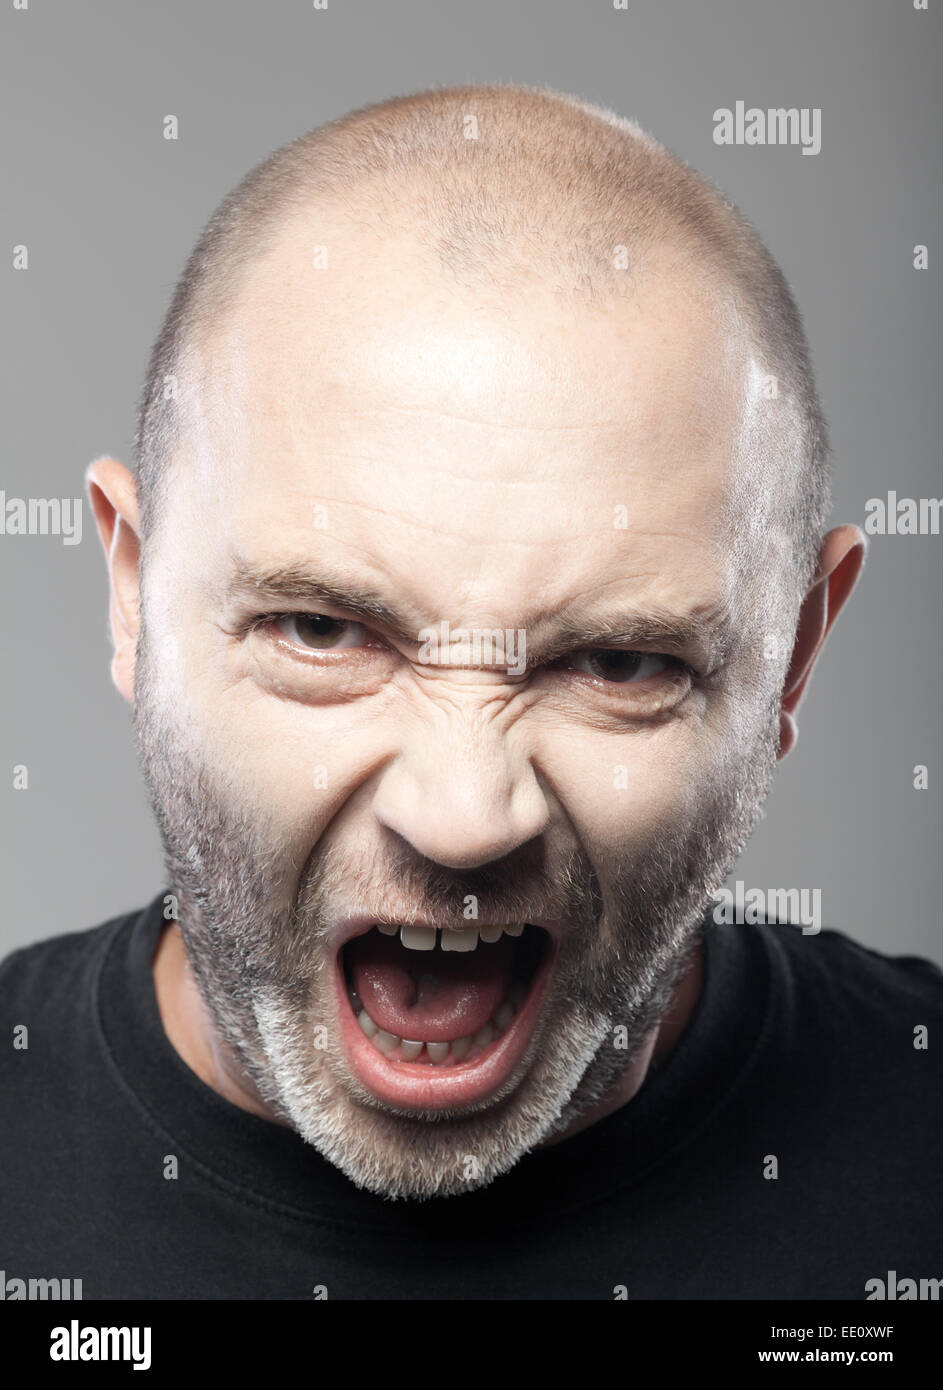 portrait of angry man sreaming isolated on gray background Stock Photo